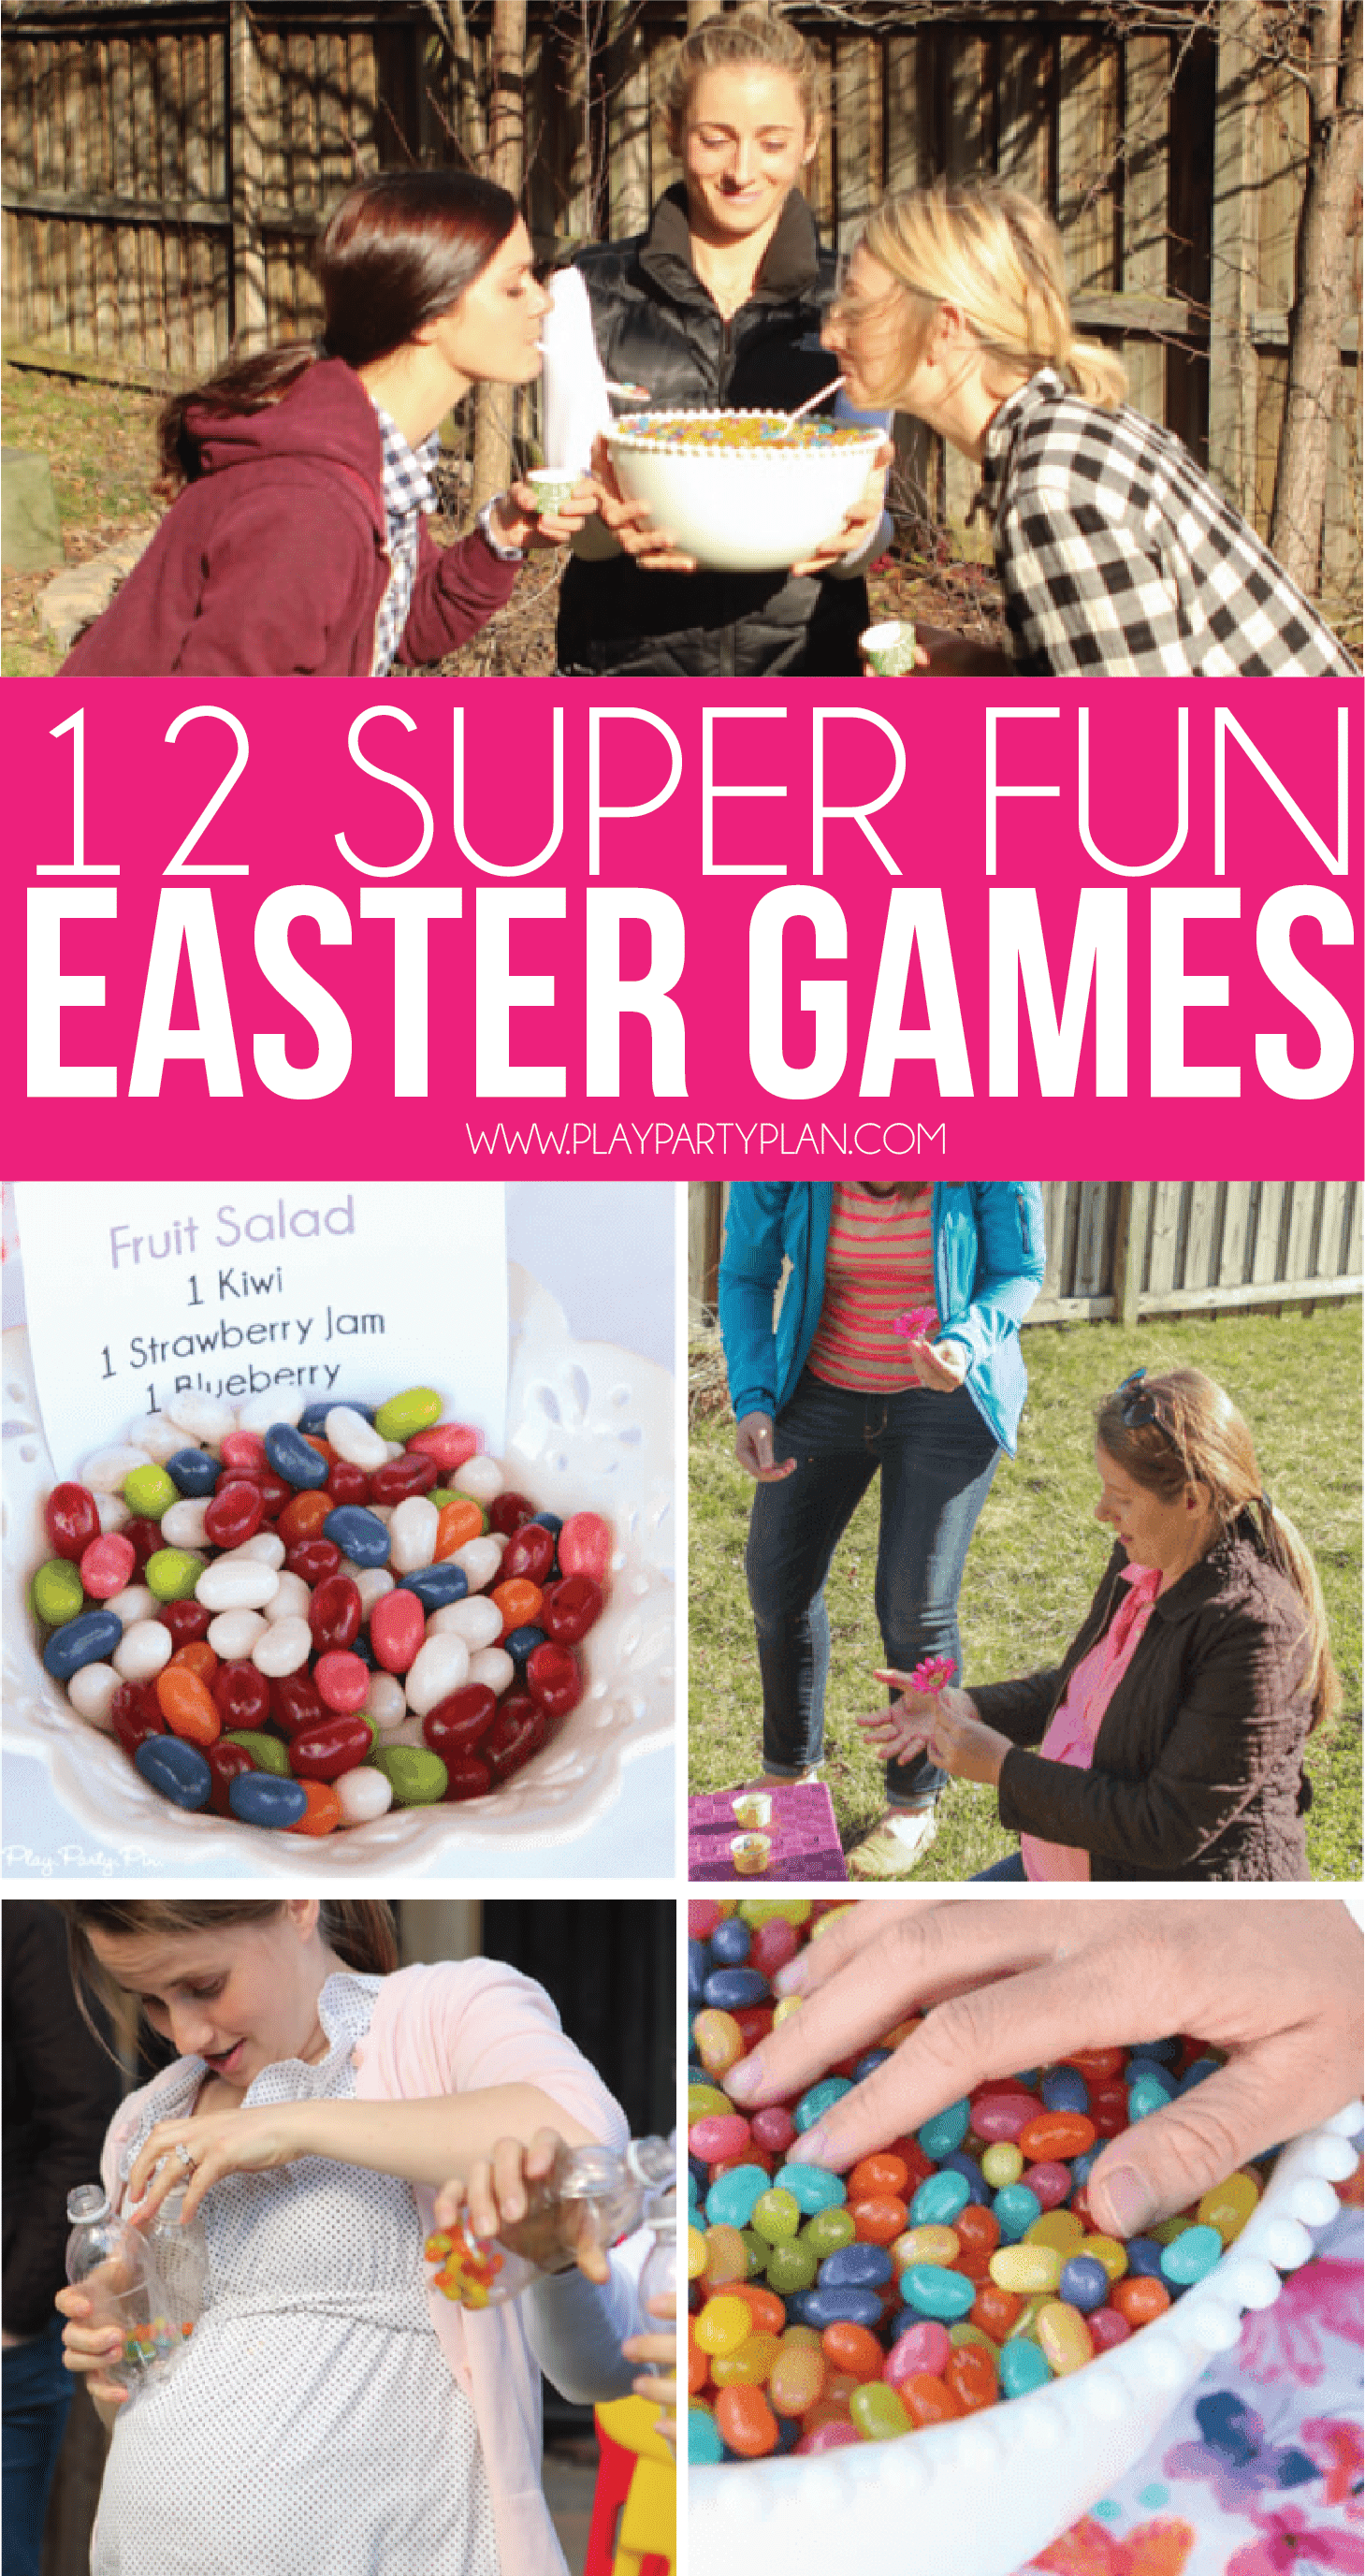 12 of the best Easter games for adults, for kids, or for teens! Play these with your family on Easter Sunday or hold an outdoor party at your church with and play these with family and friends! They’re minute to win it style games so they work for all ages - preschool and up!